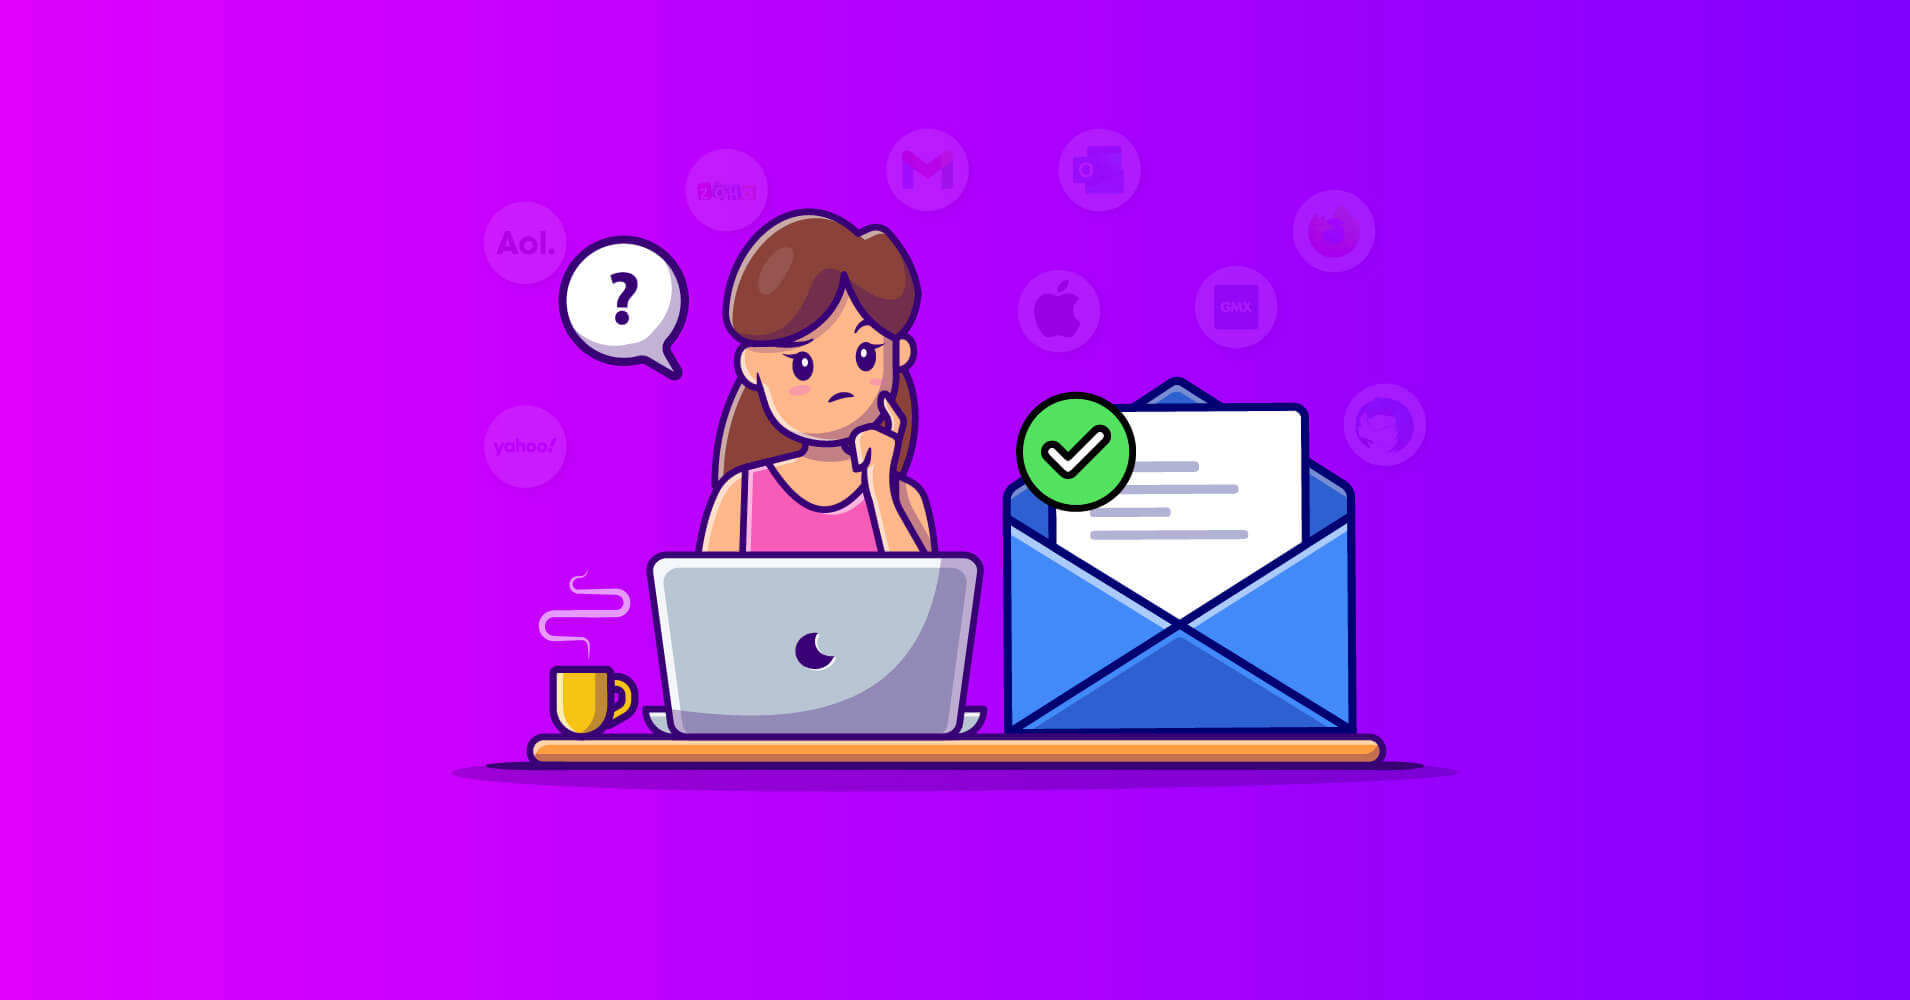 Email Safelist: How to Ask Your Recipients to Safelist Your Email Address 